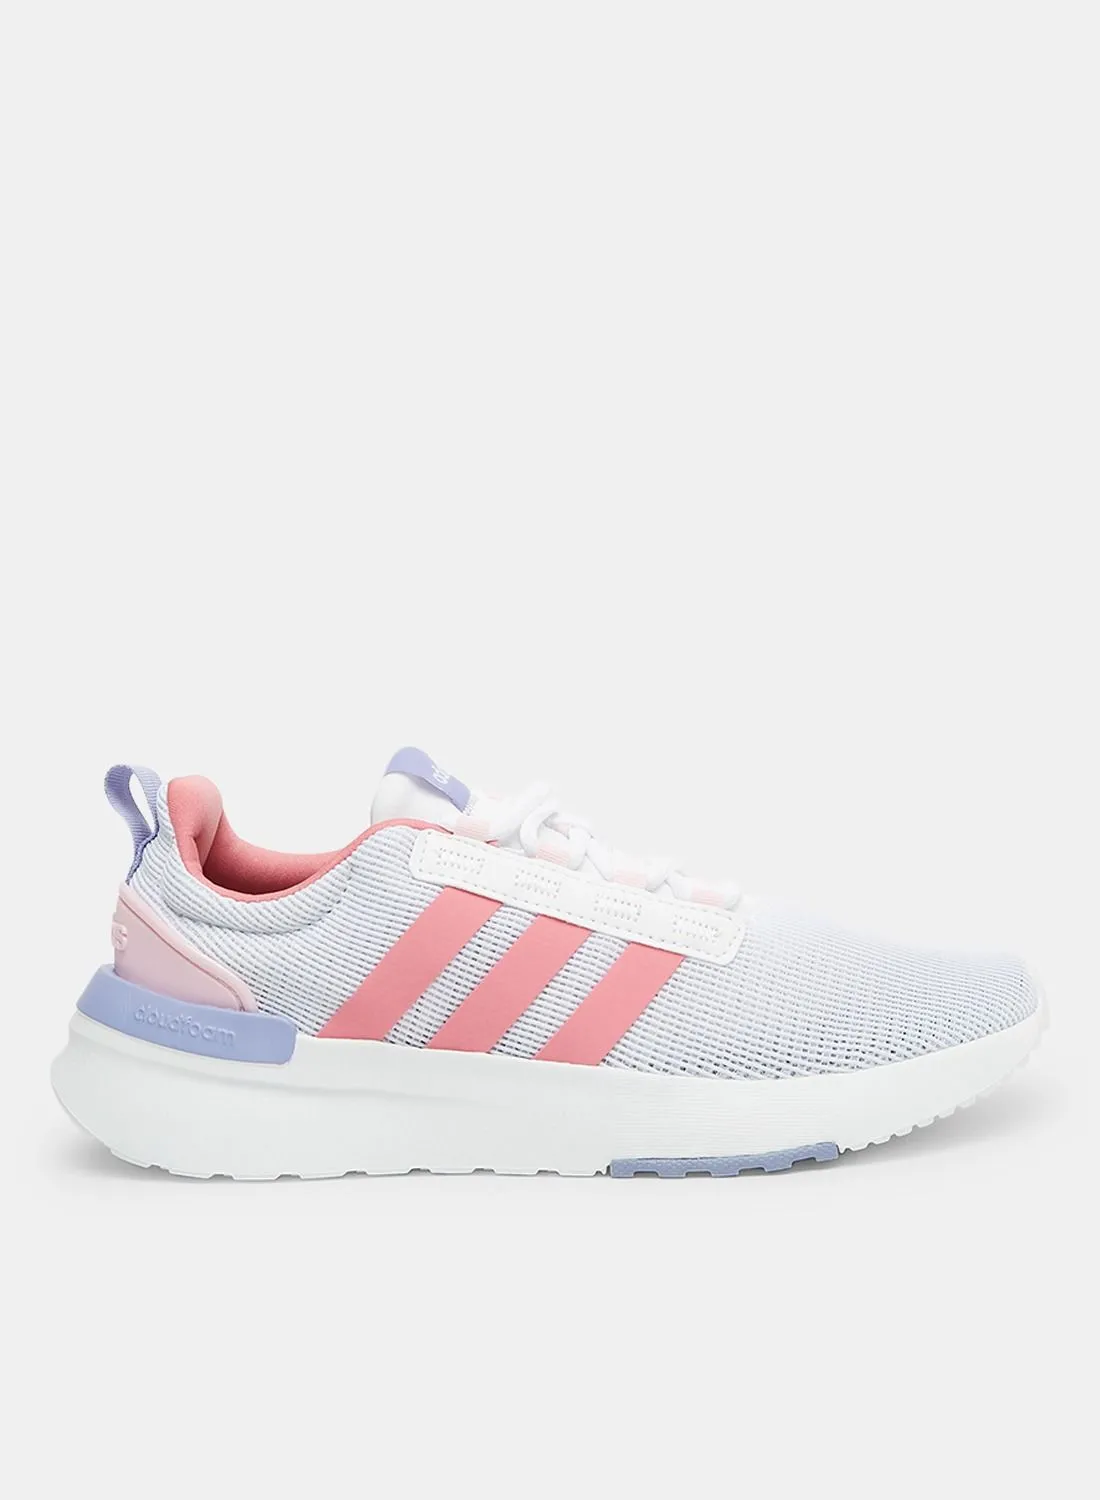 Adidas Girls Racer TR21 Shoes